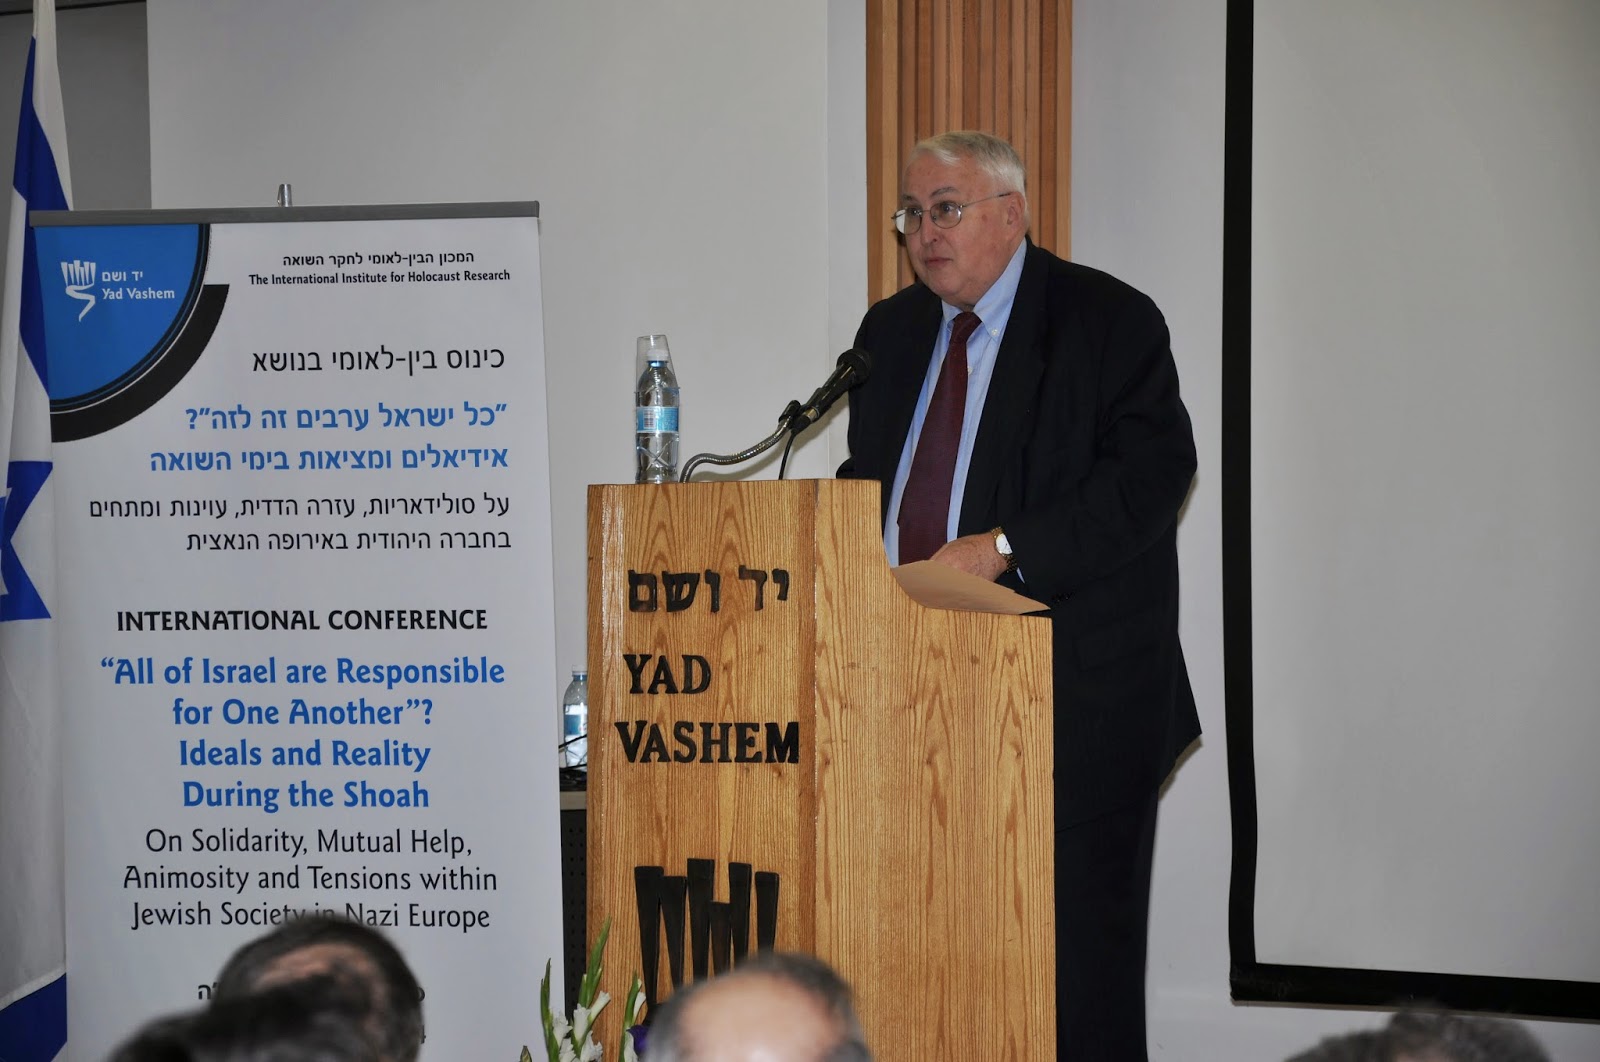 "All of Israel are Responsible for One Another"? International Research Conference at Yad Vashem